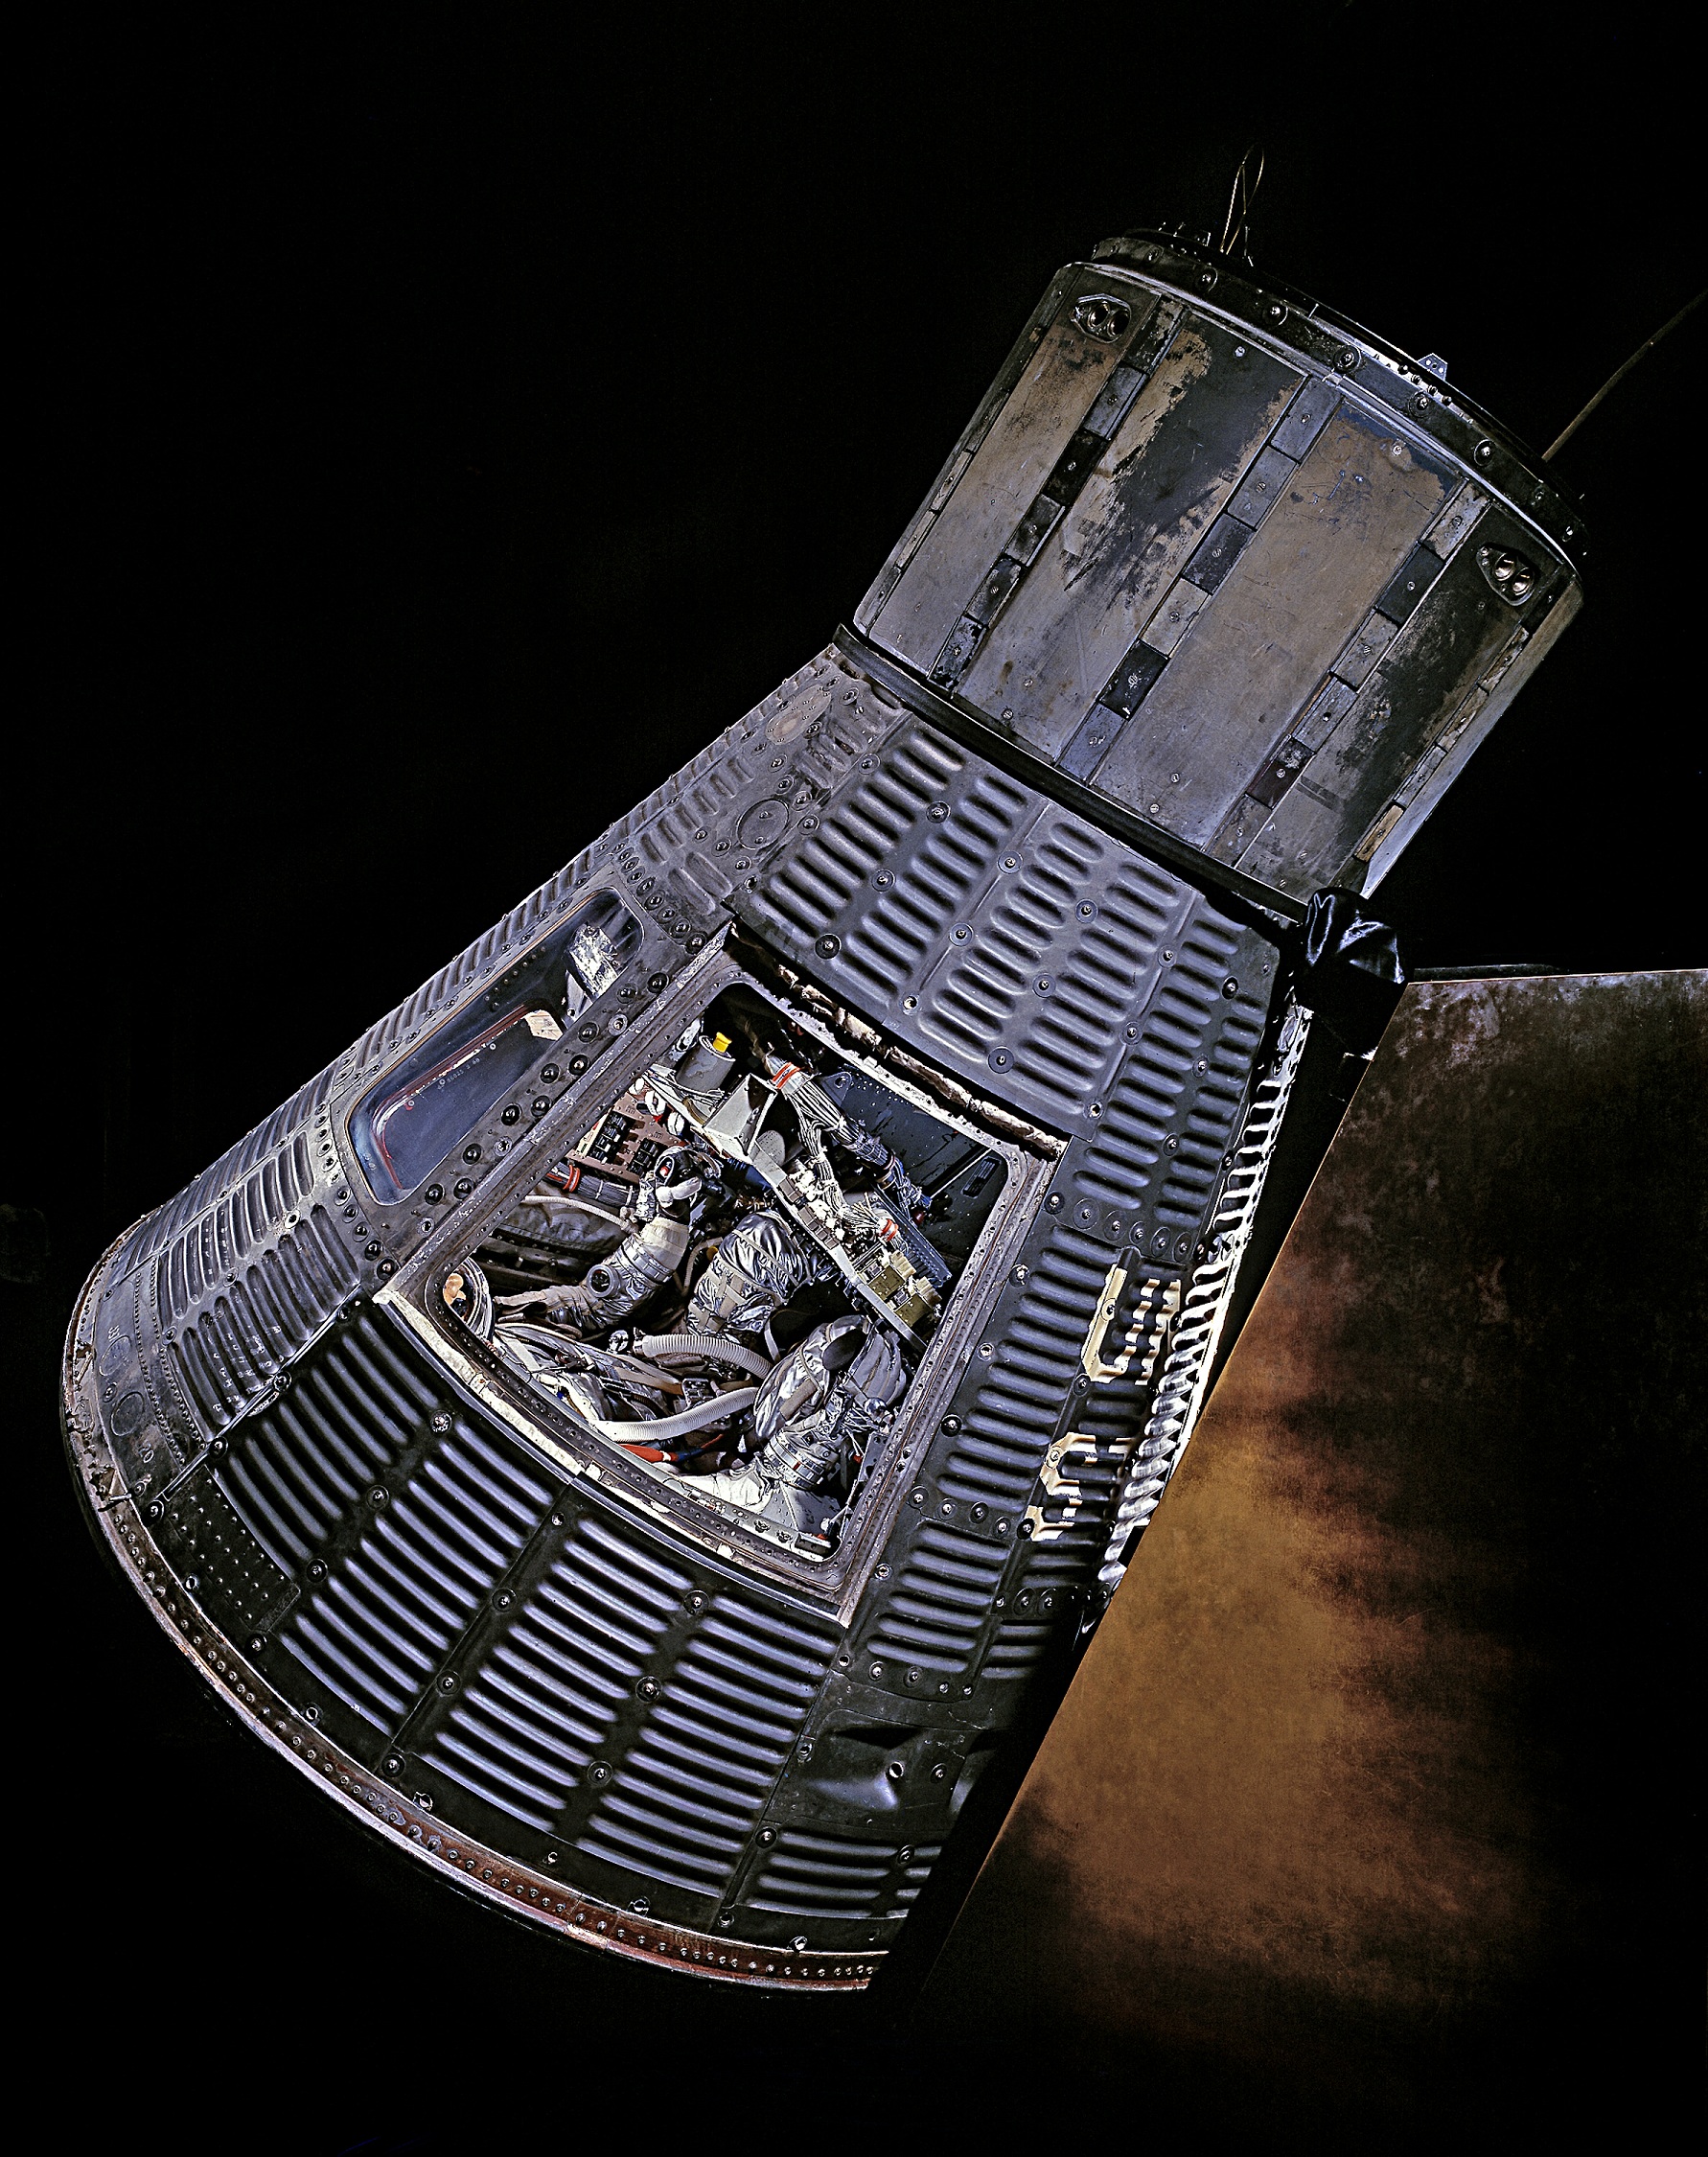 John Glenn's Mercury spacecraft, Friendship 7, on display at the Smithsonian Institution National Air and Space Museum. (Photo by Eric Long, National Air and Space Museum, Smithsonian Institution.)